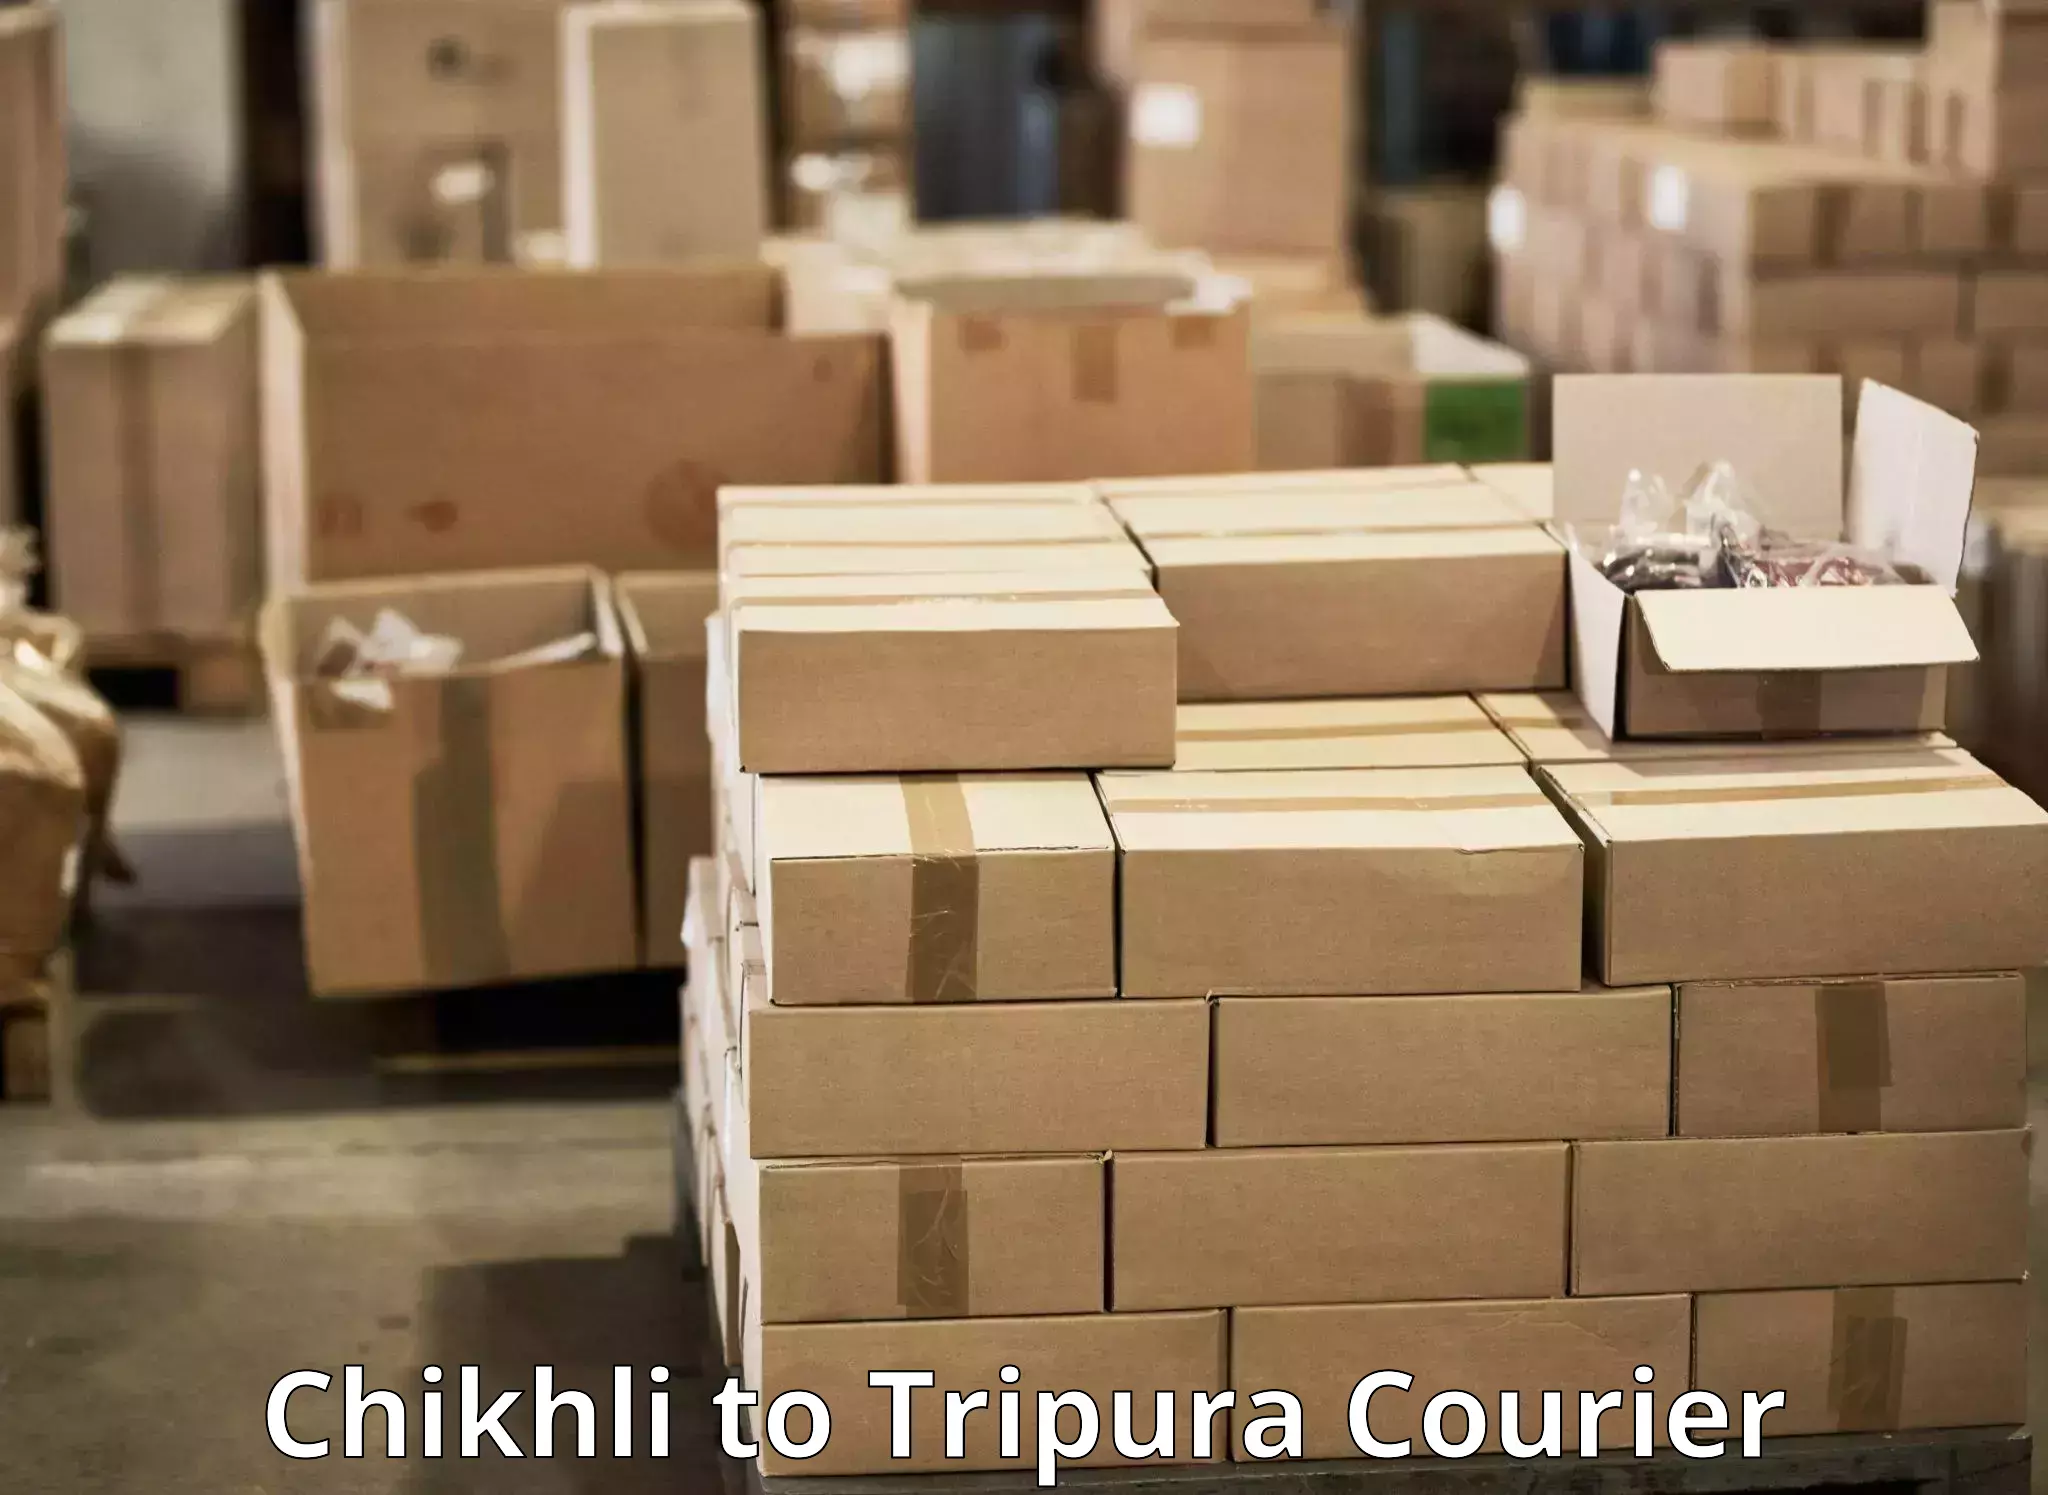 Express delivery capabilities Chikhli to Agartala